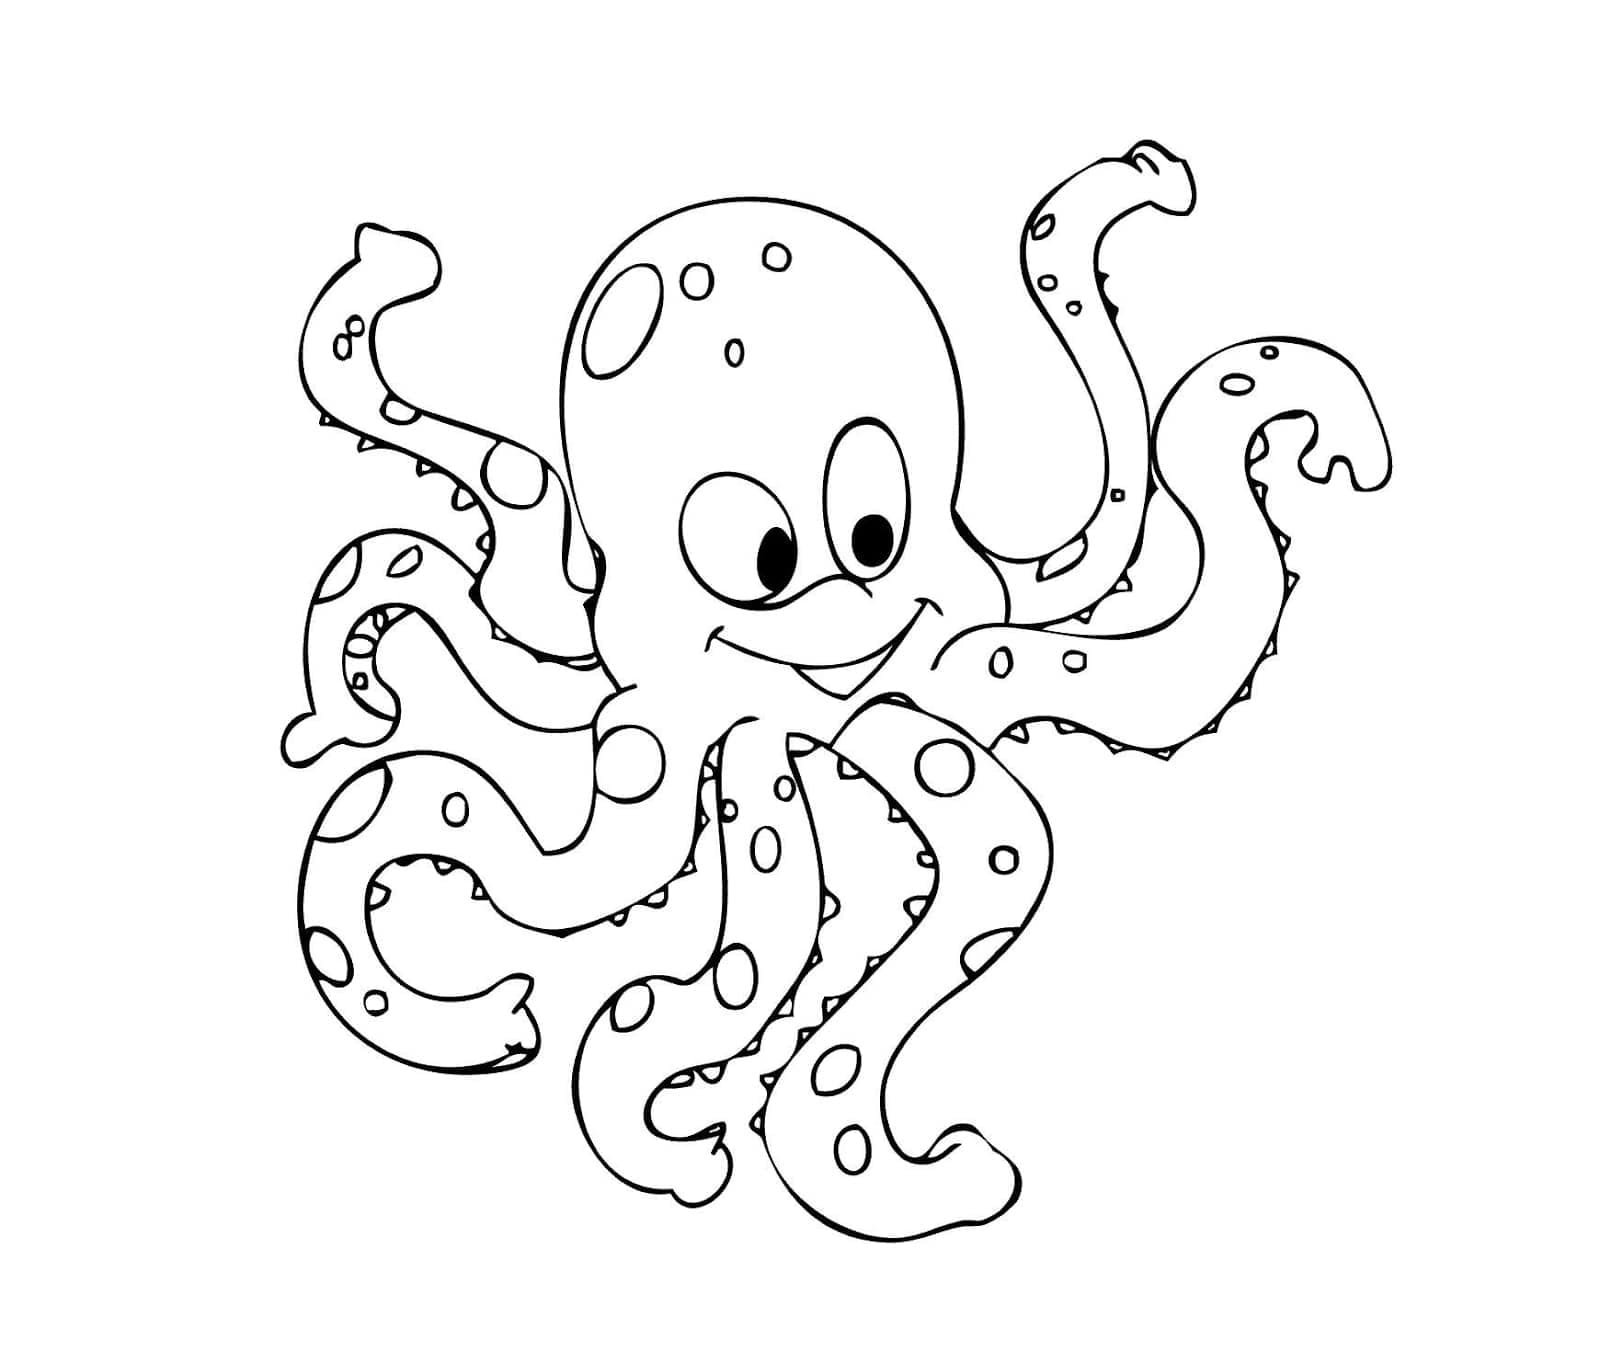 Great octopus coloring book for little ones